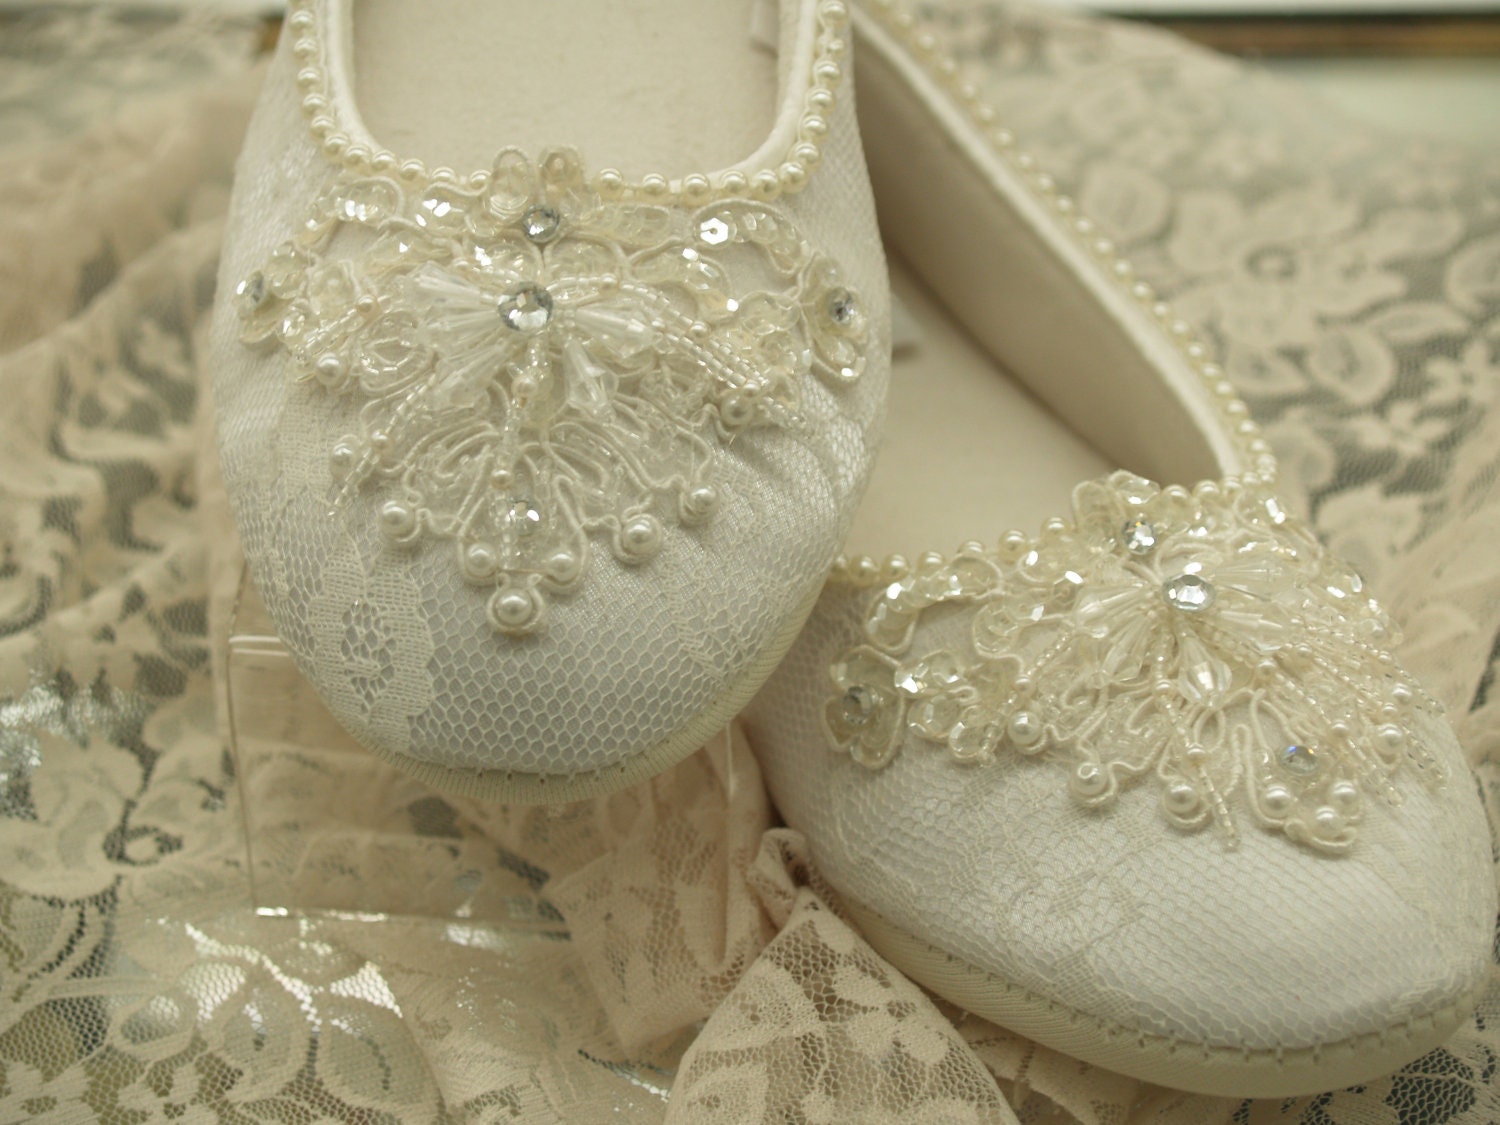 Wedding Ivory Flat Shoes Hand stitched pearls edging by NewBrideCo